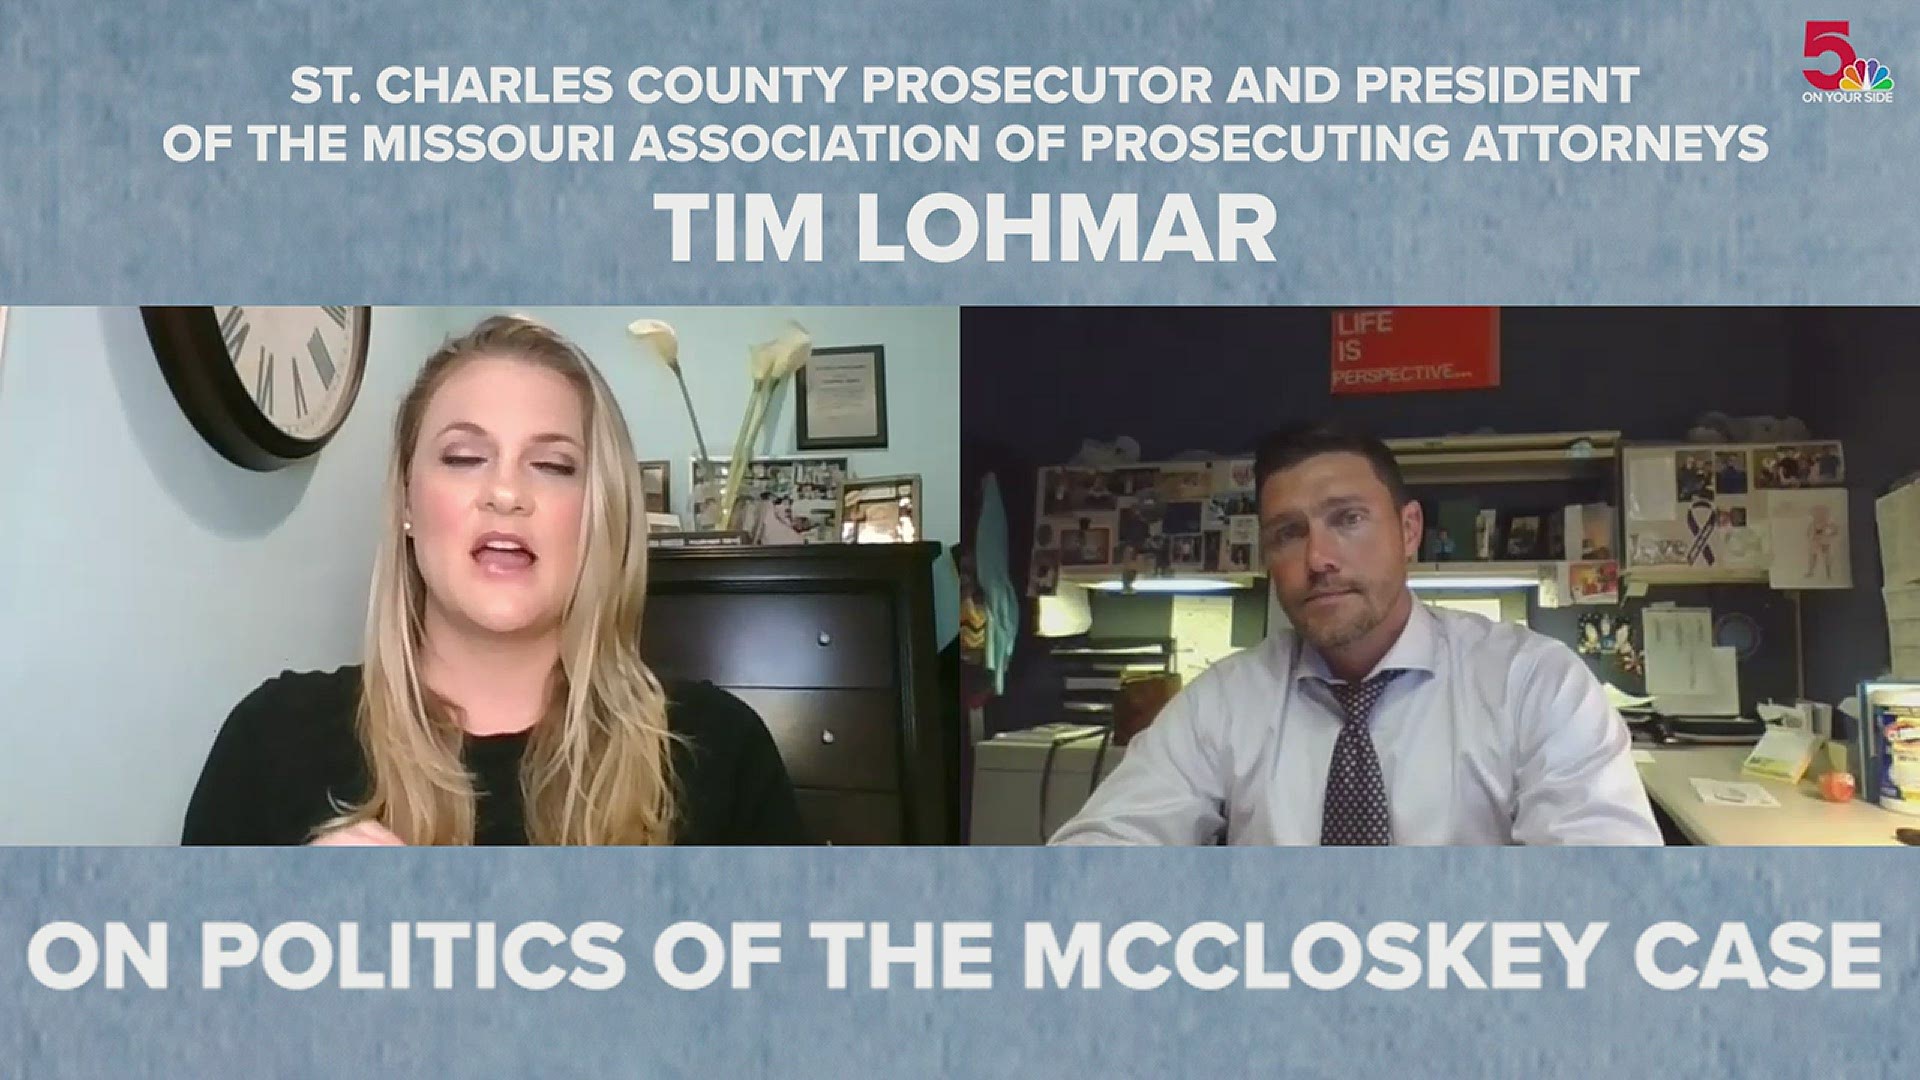 there is one local Republican who is not joining the parade – St. Charles County Prosecutor Tim Lohmar.